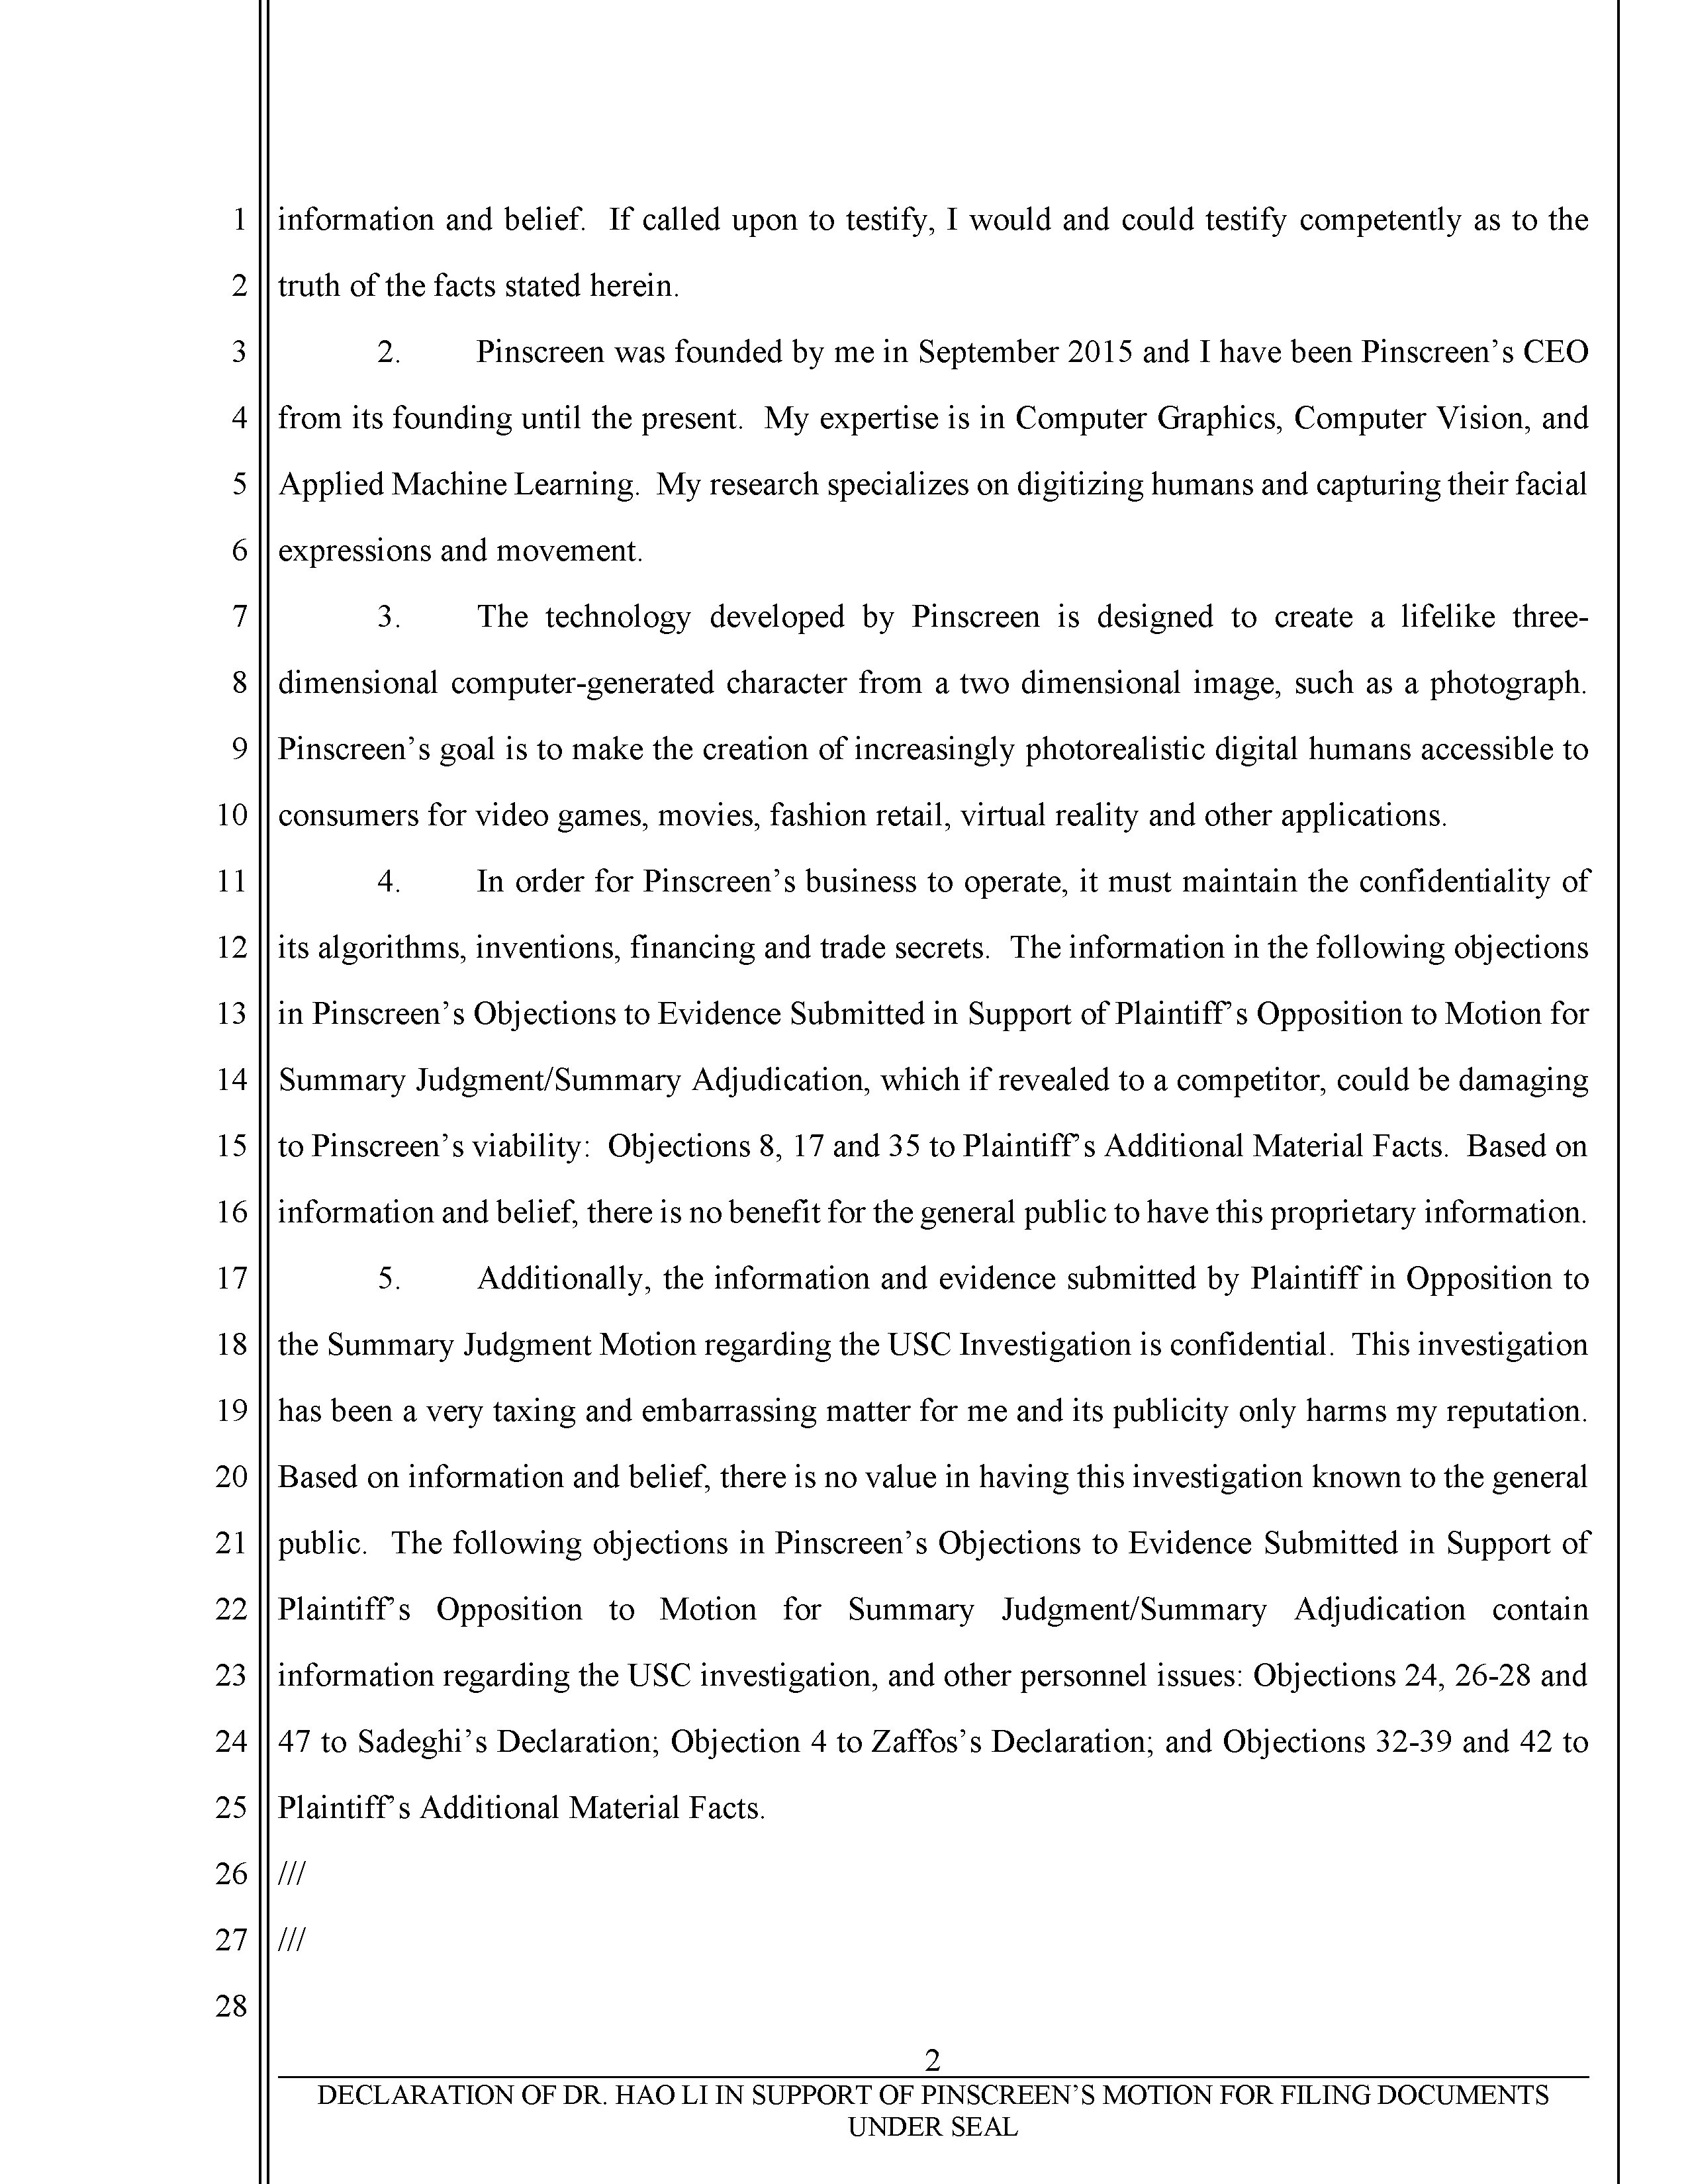 Pinscreen’s Motion to Seal USC’s Investigation of Hao Li’s Scientific Misconduct Page 63